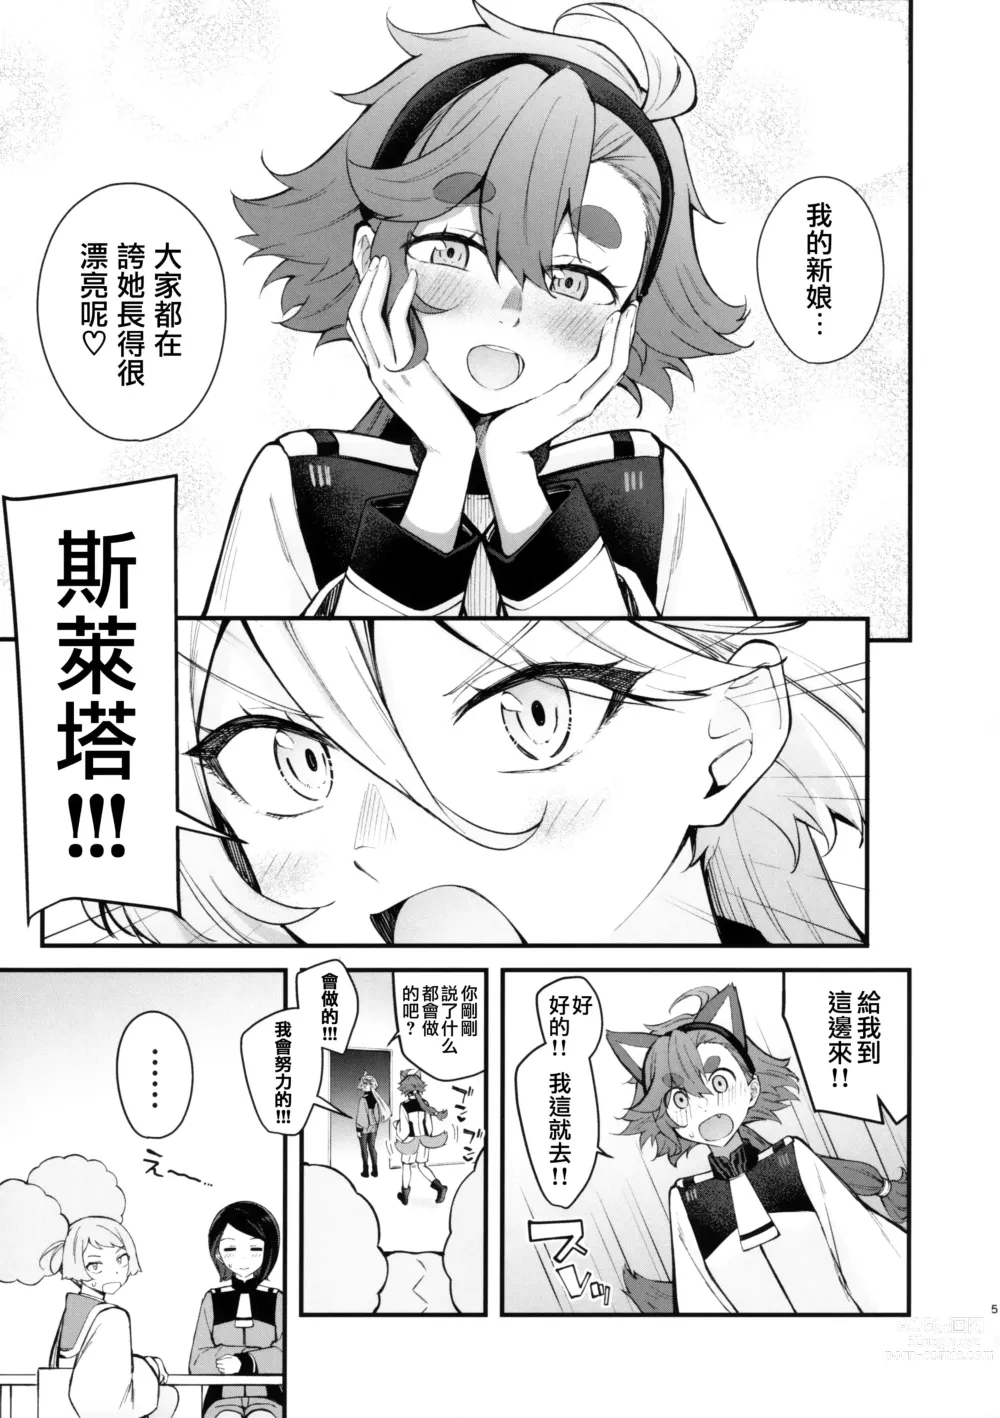 Page 5 of doujinshi 我的可爱新娘大人